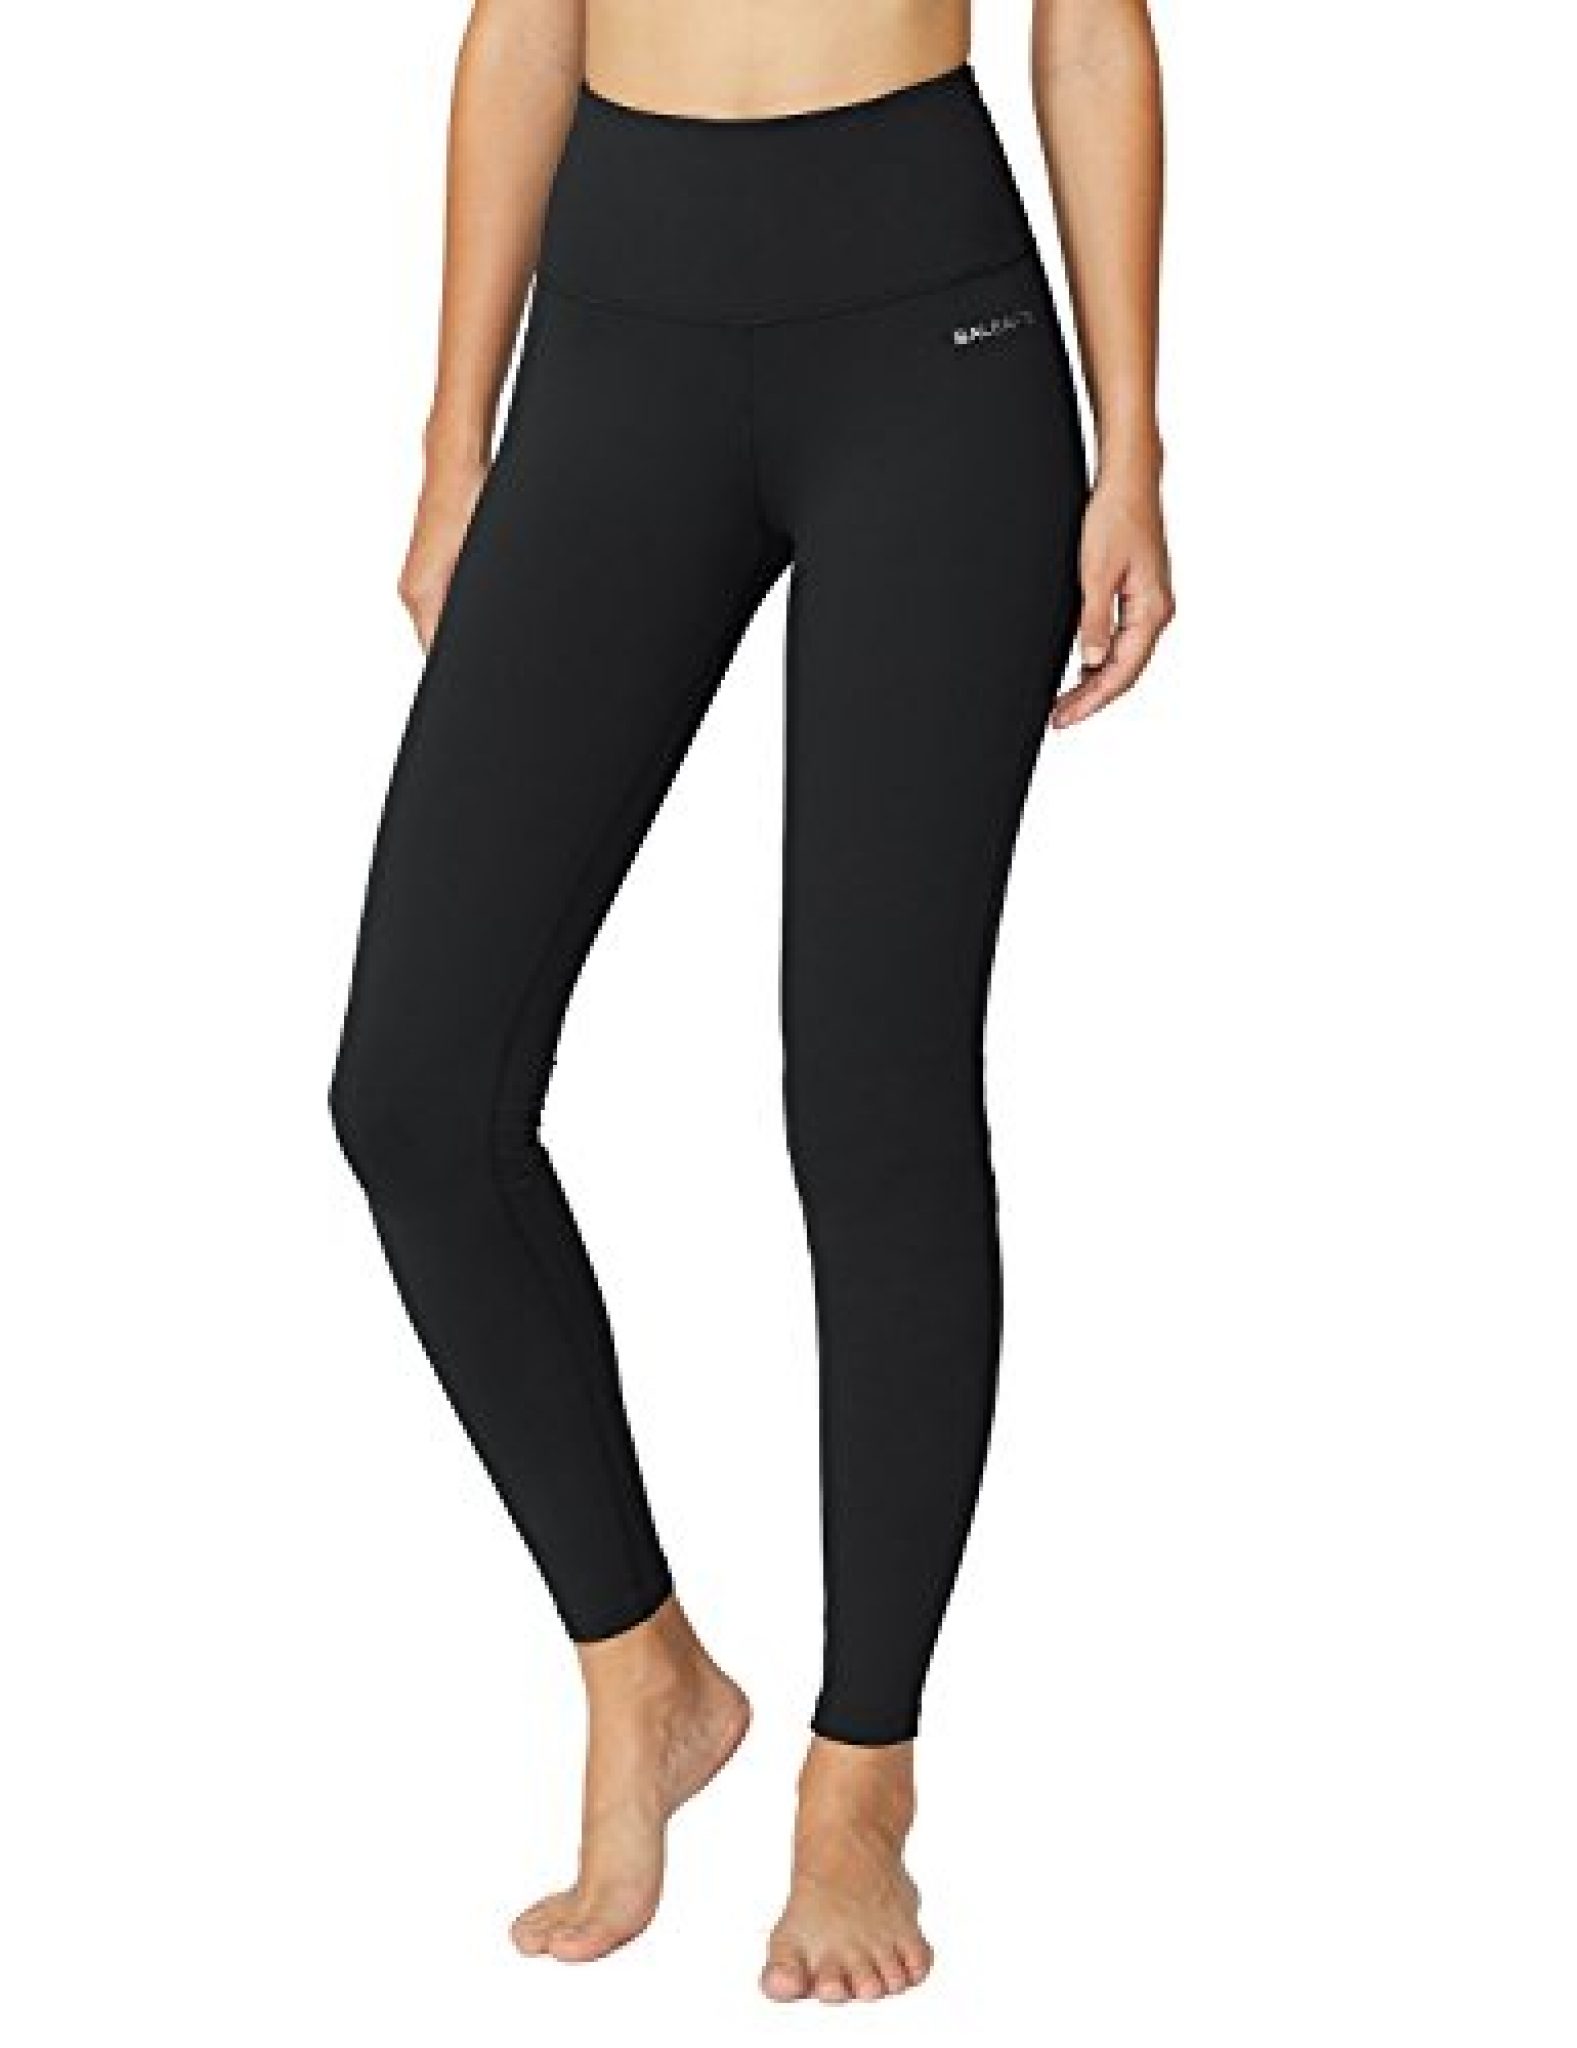 11 Gym Leggings & Yoga Pants That Come With Pockets